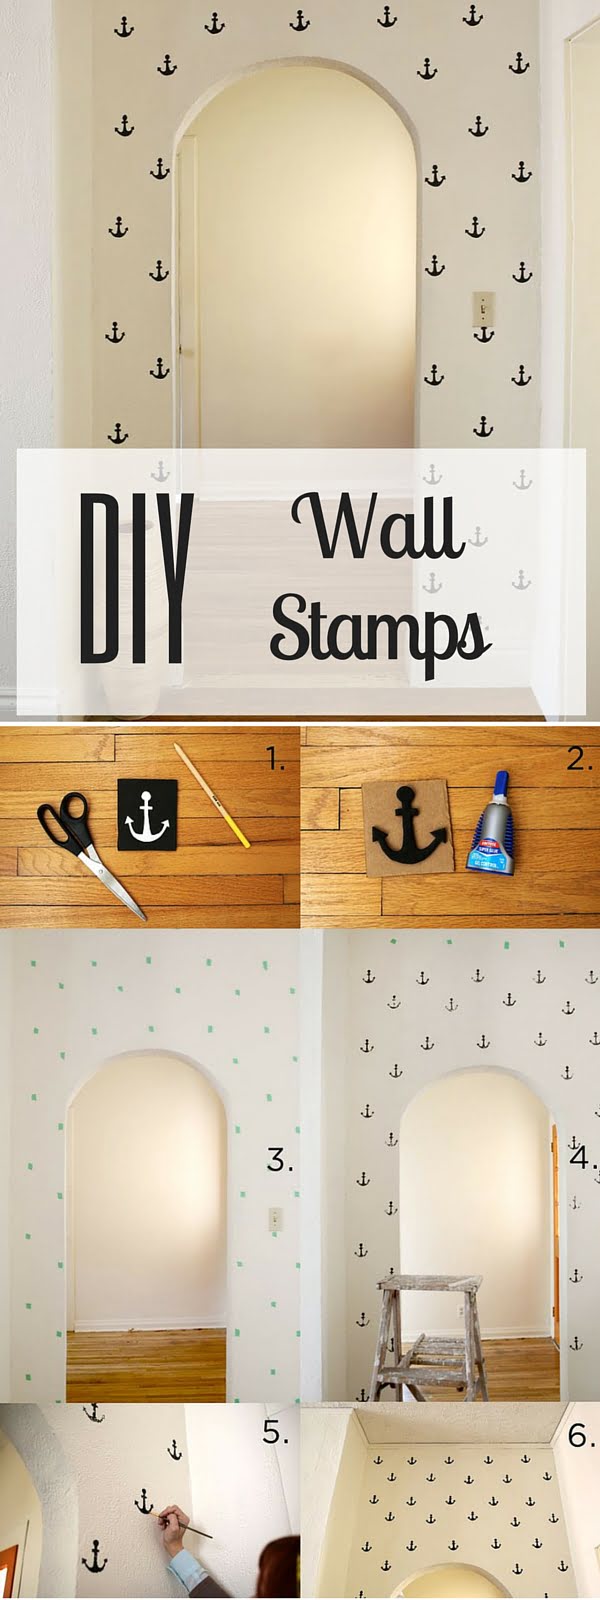  Wall Stamps  